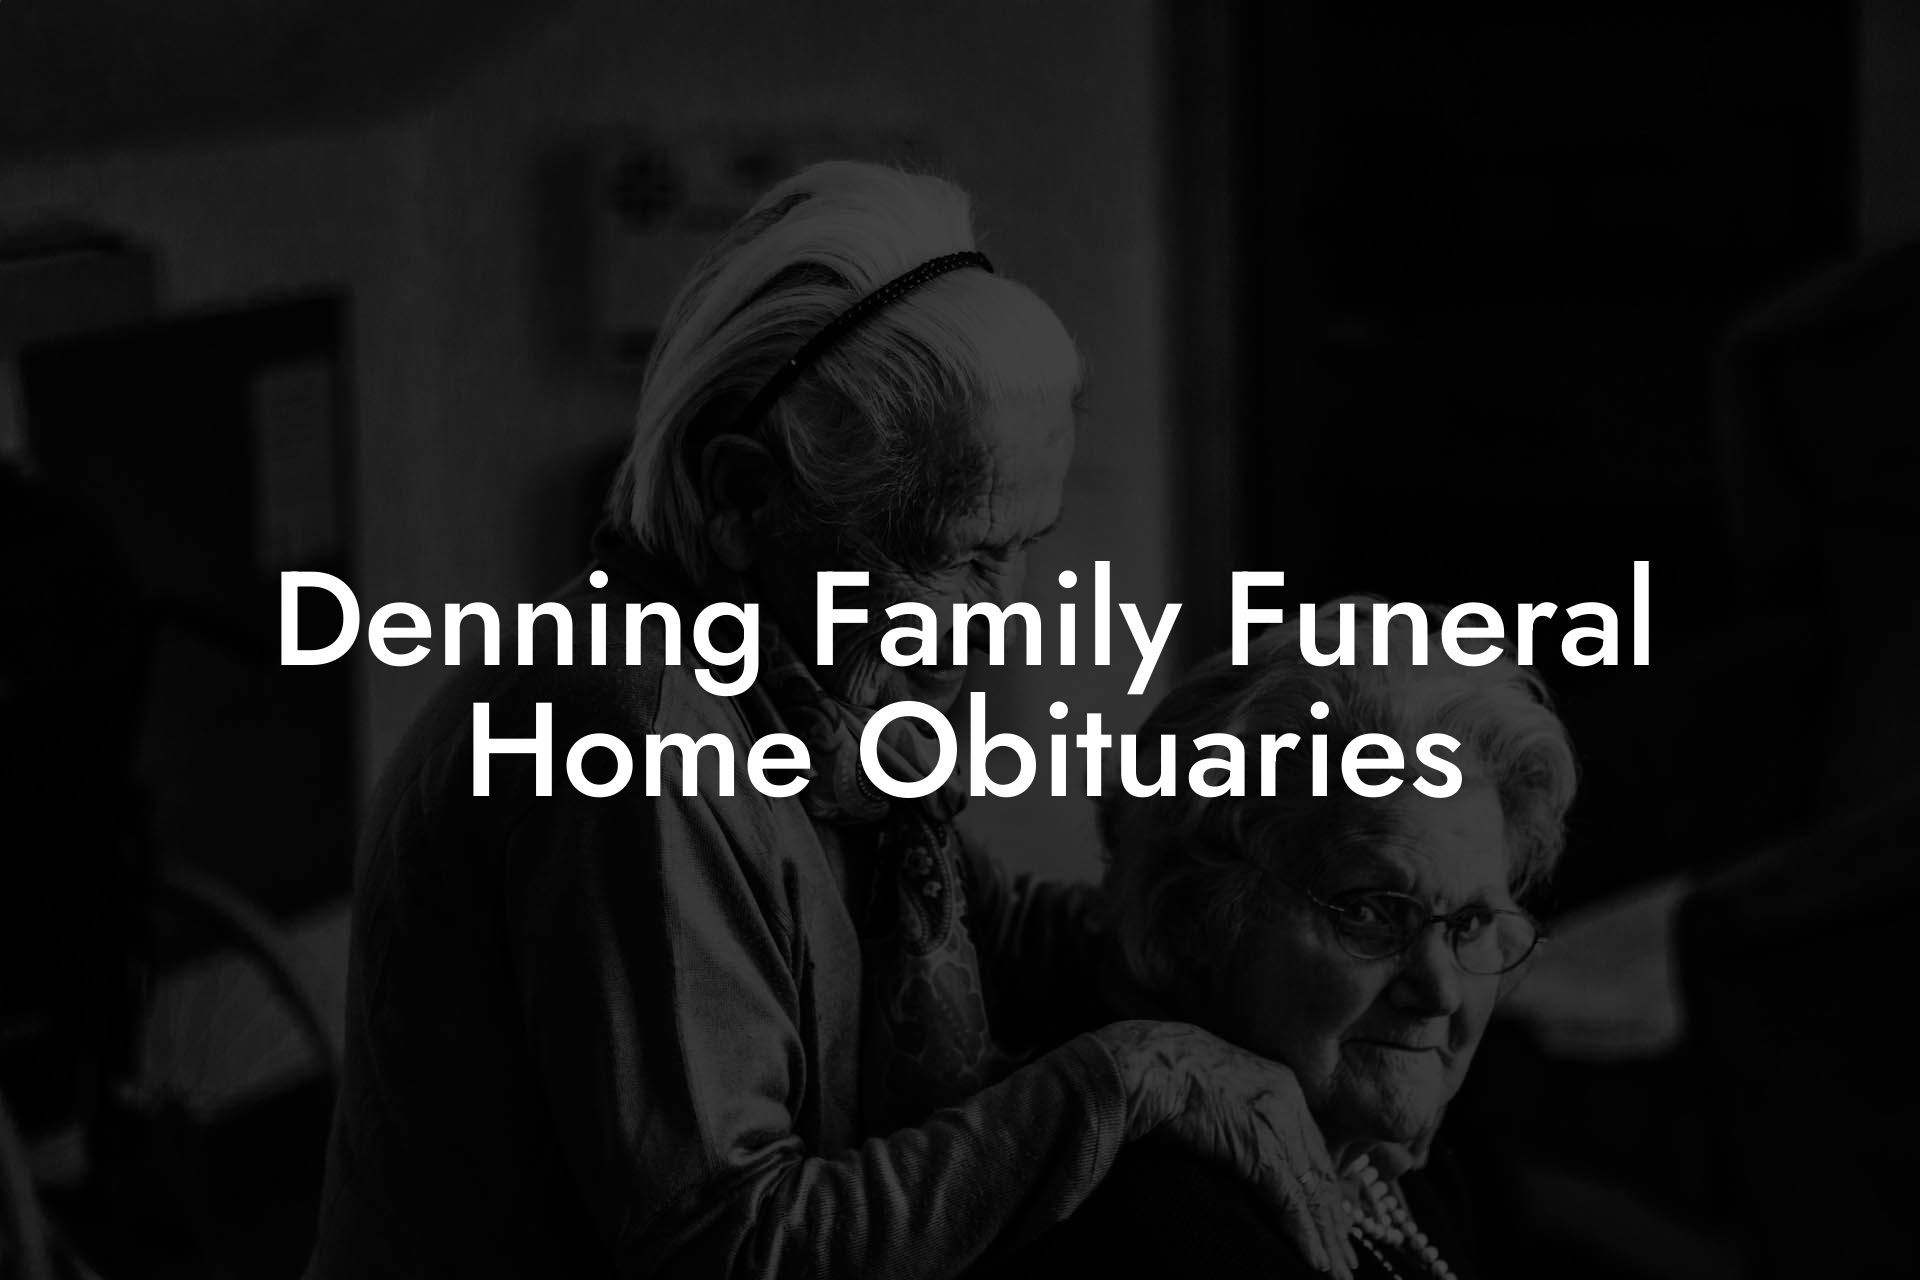 Denning Family Funeral Home Obituaries